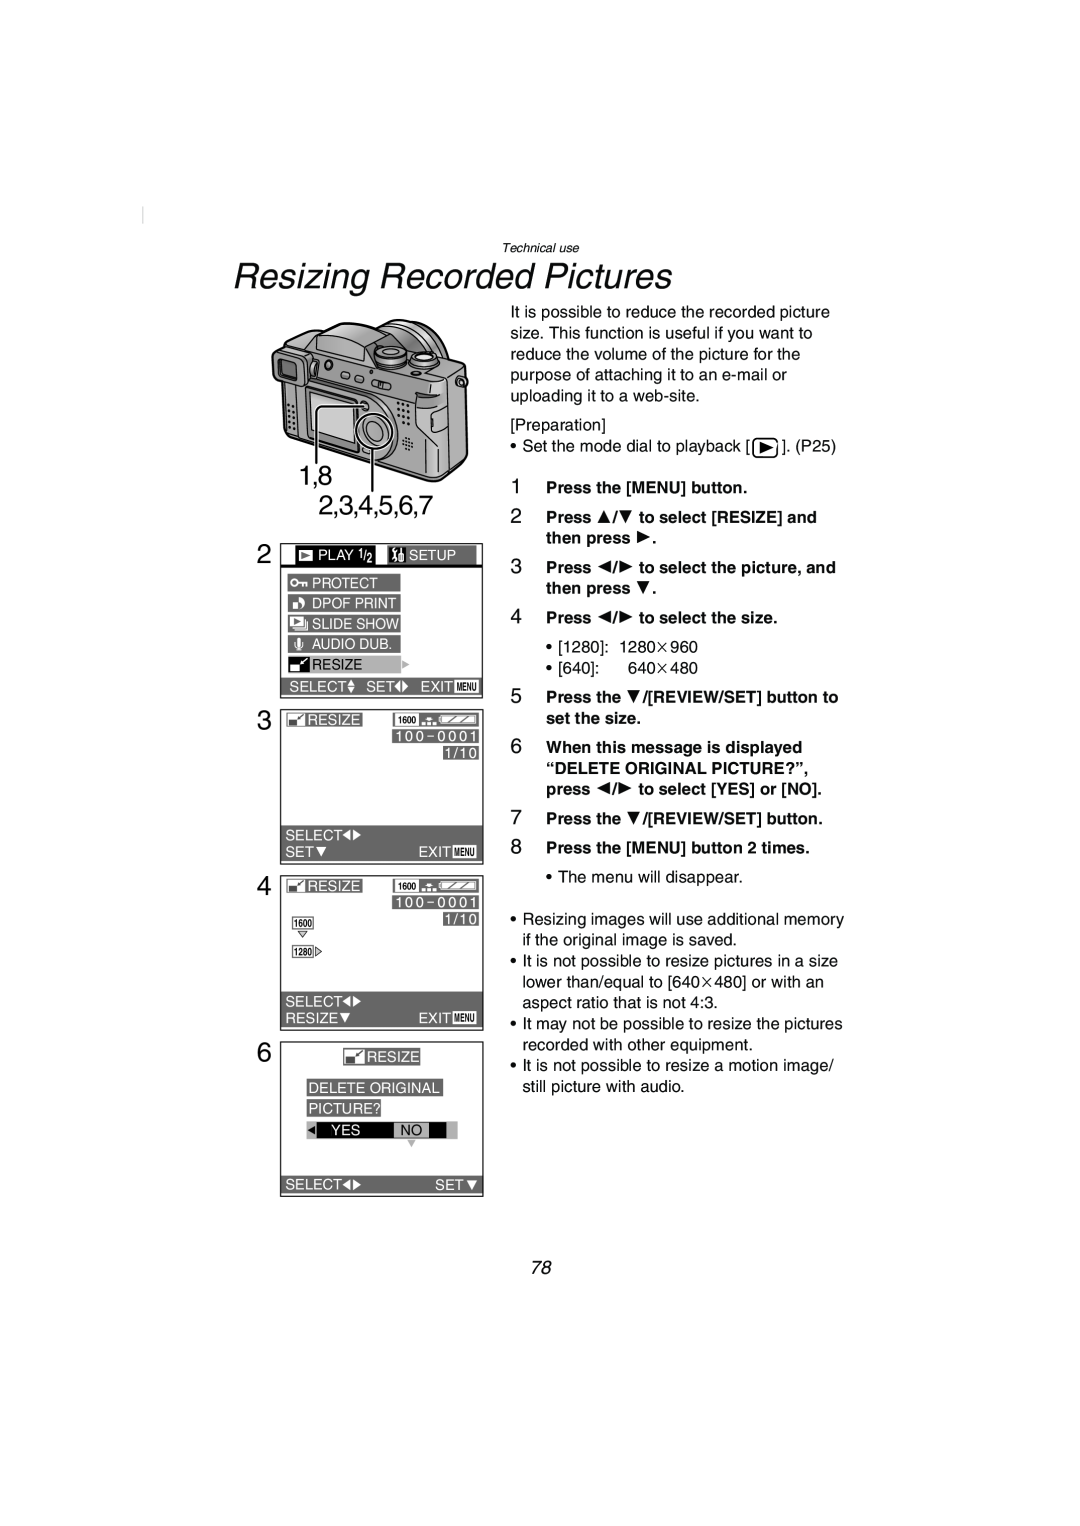 Panasonic DMC-FZ2PP Resizing Recorded Pictures, 1,8 2,3,4,5,6,7, Press 2/1 to select the picture, and then press 